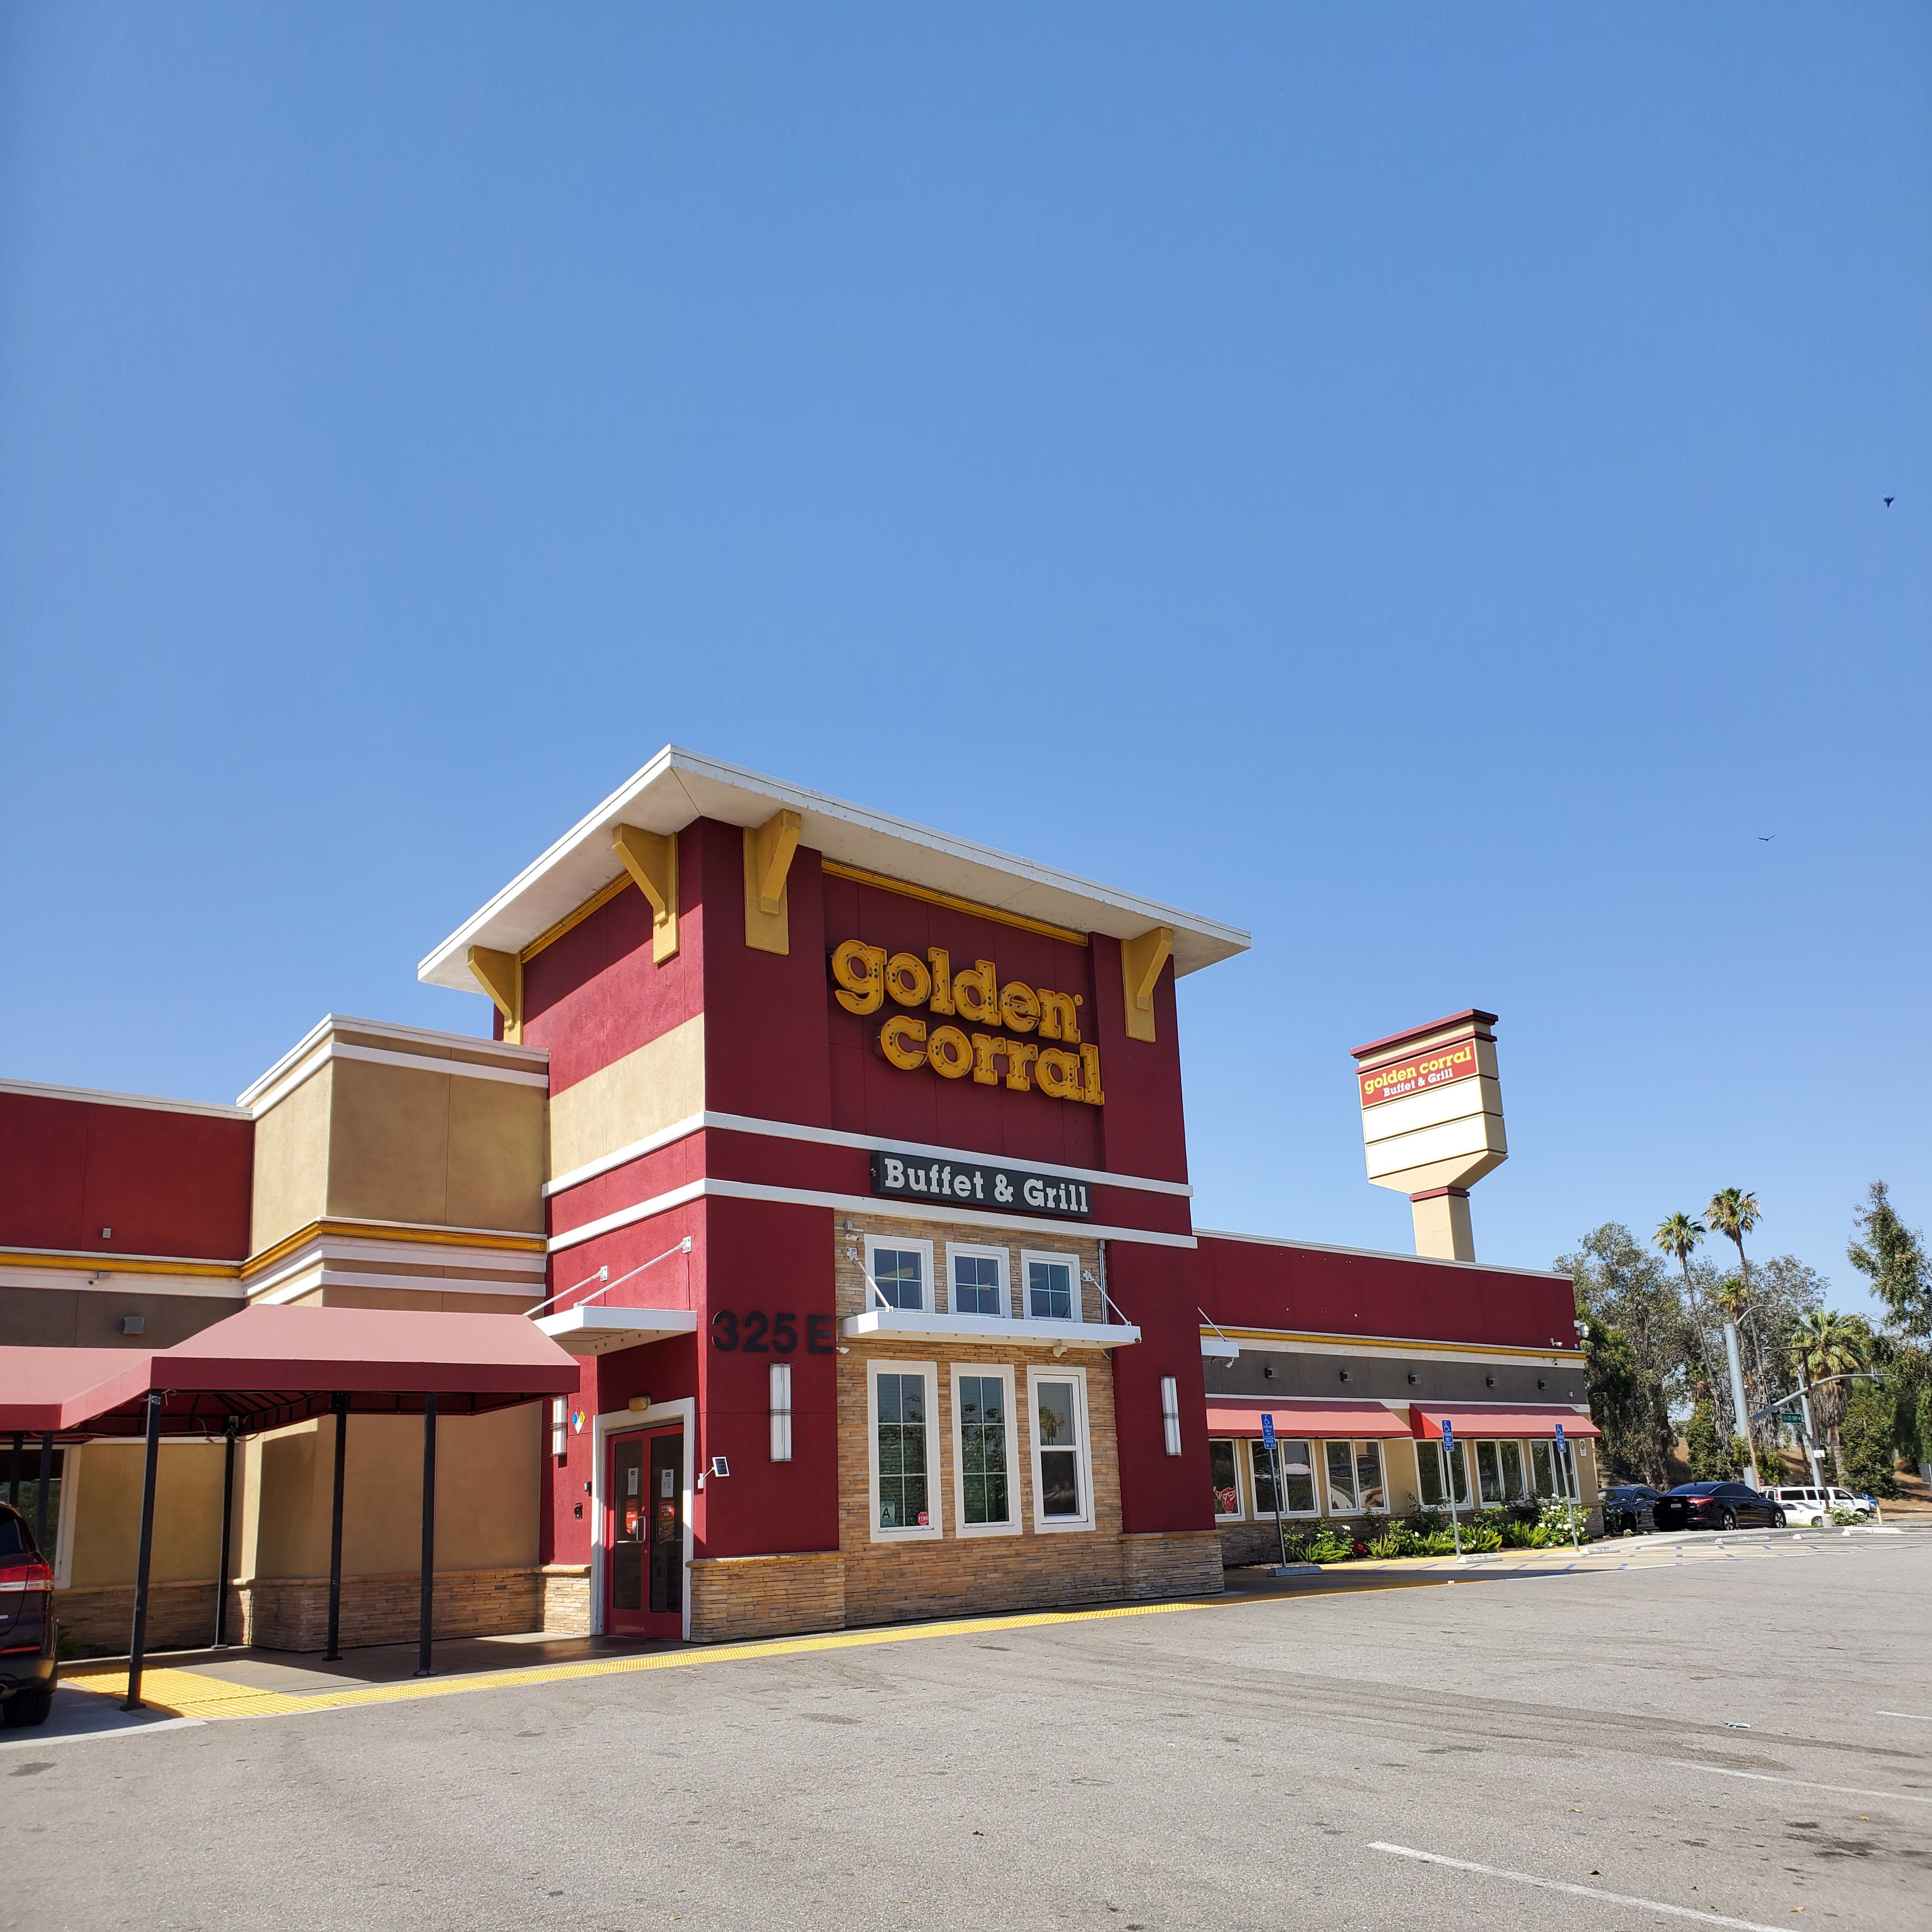 Golden Corral - Land and Structure for sale